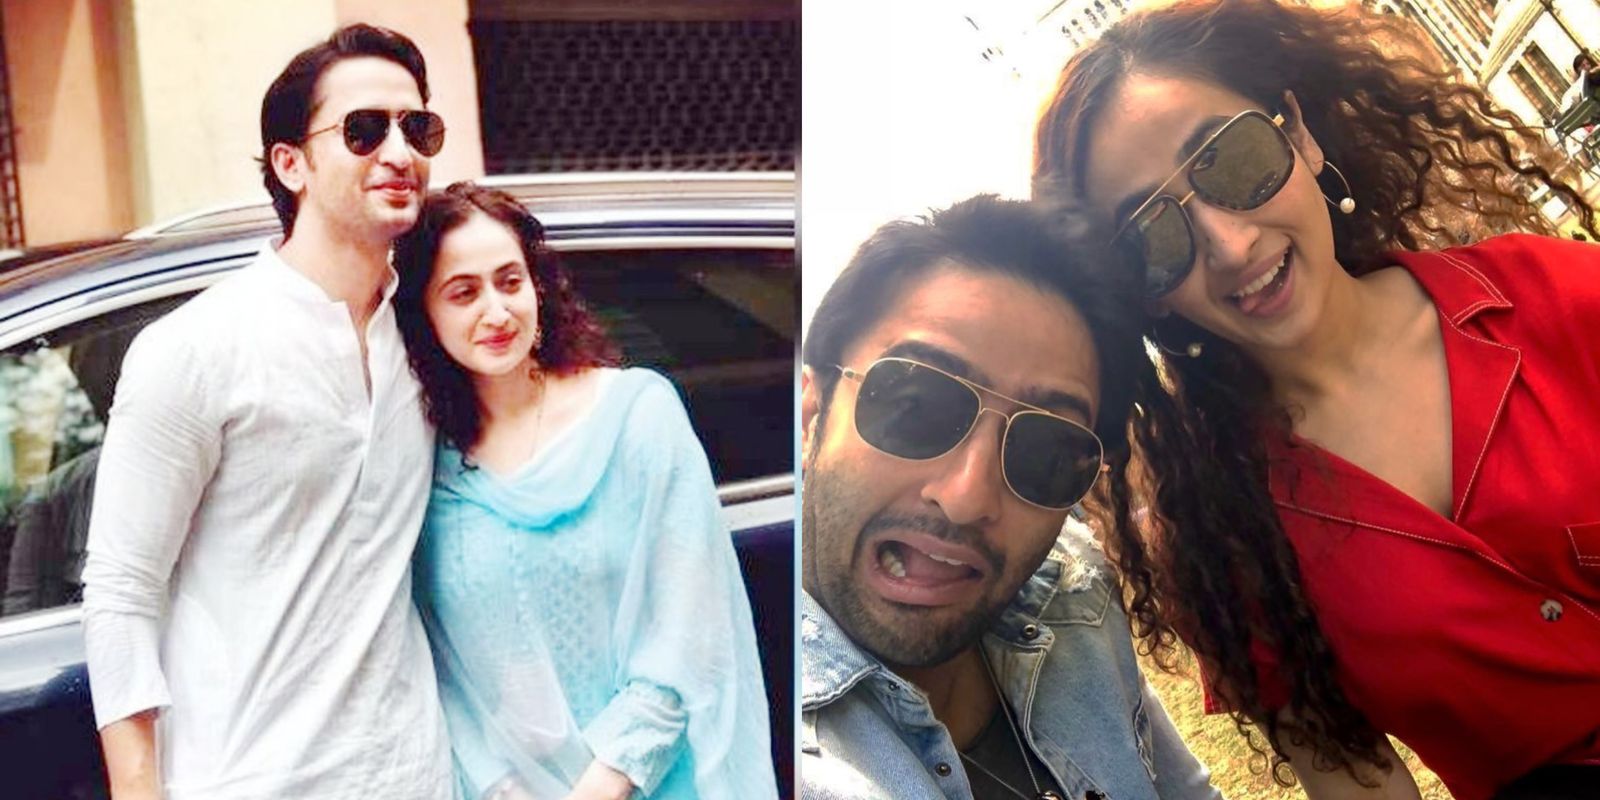 Shaheer Sheikh On Falling For Ruchikaa: ‘I Felt Like This Is The Right Combination, I Can Be Myself And I Can Have Fun’